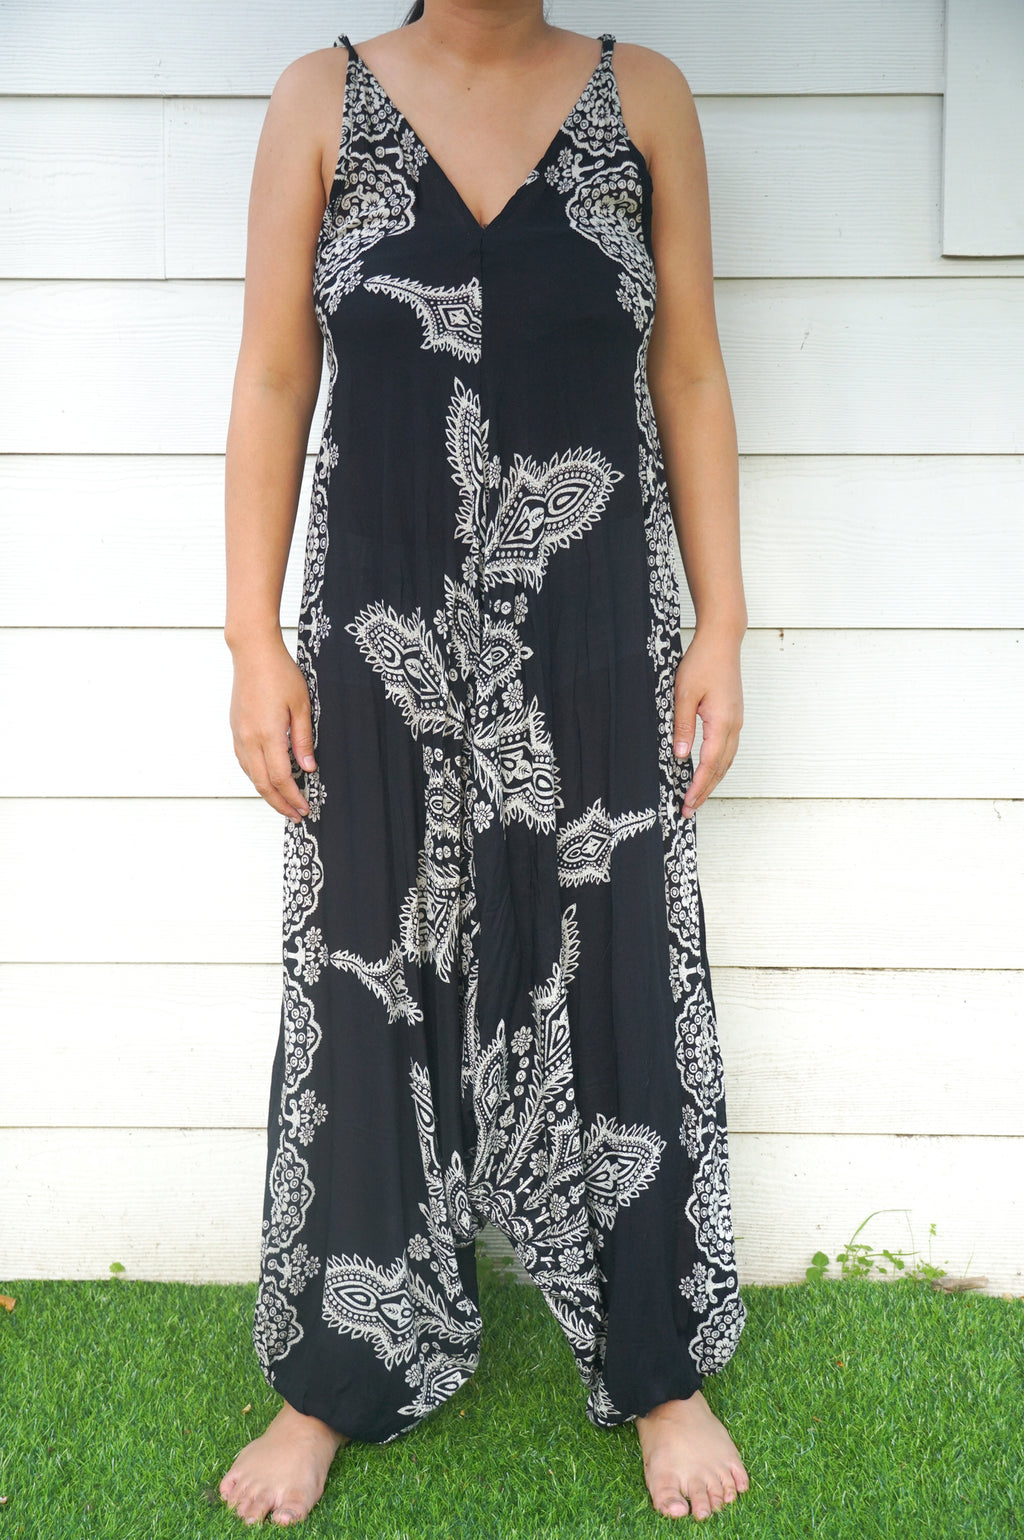 Black Butterfly Hippie Jumpsuits, Boho Rompers, Festival Clothing